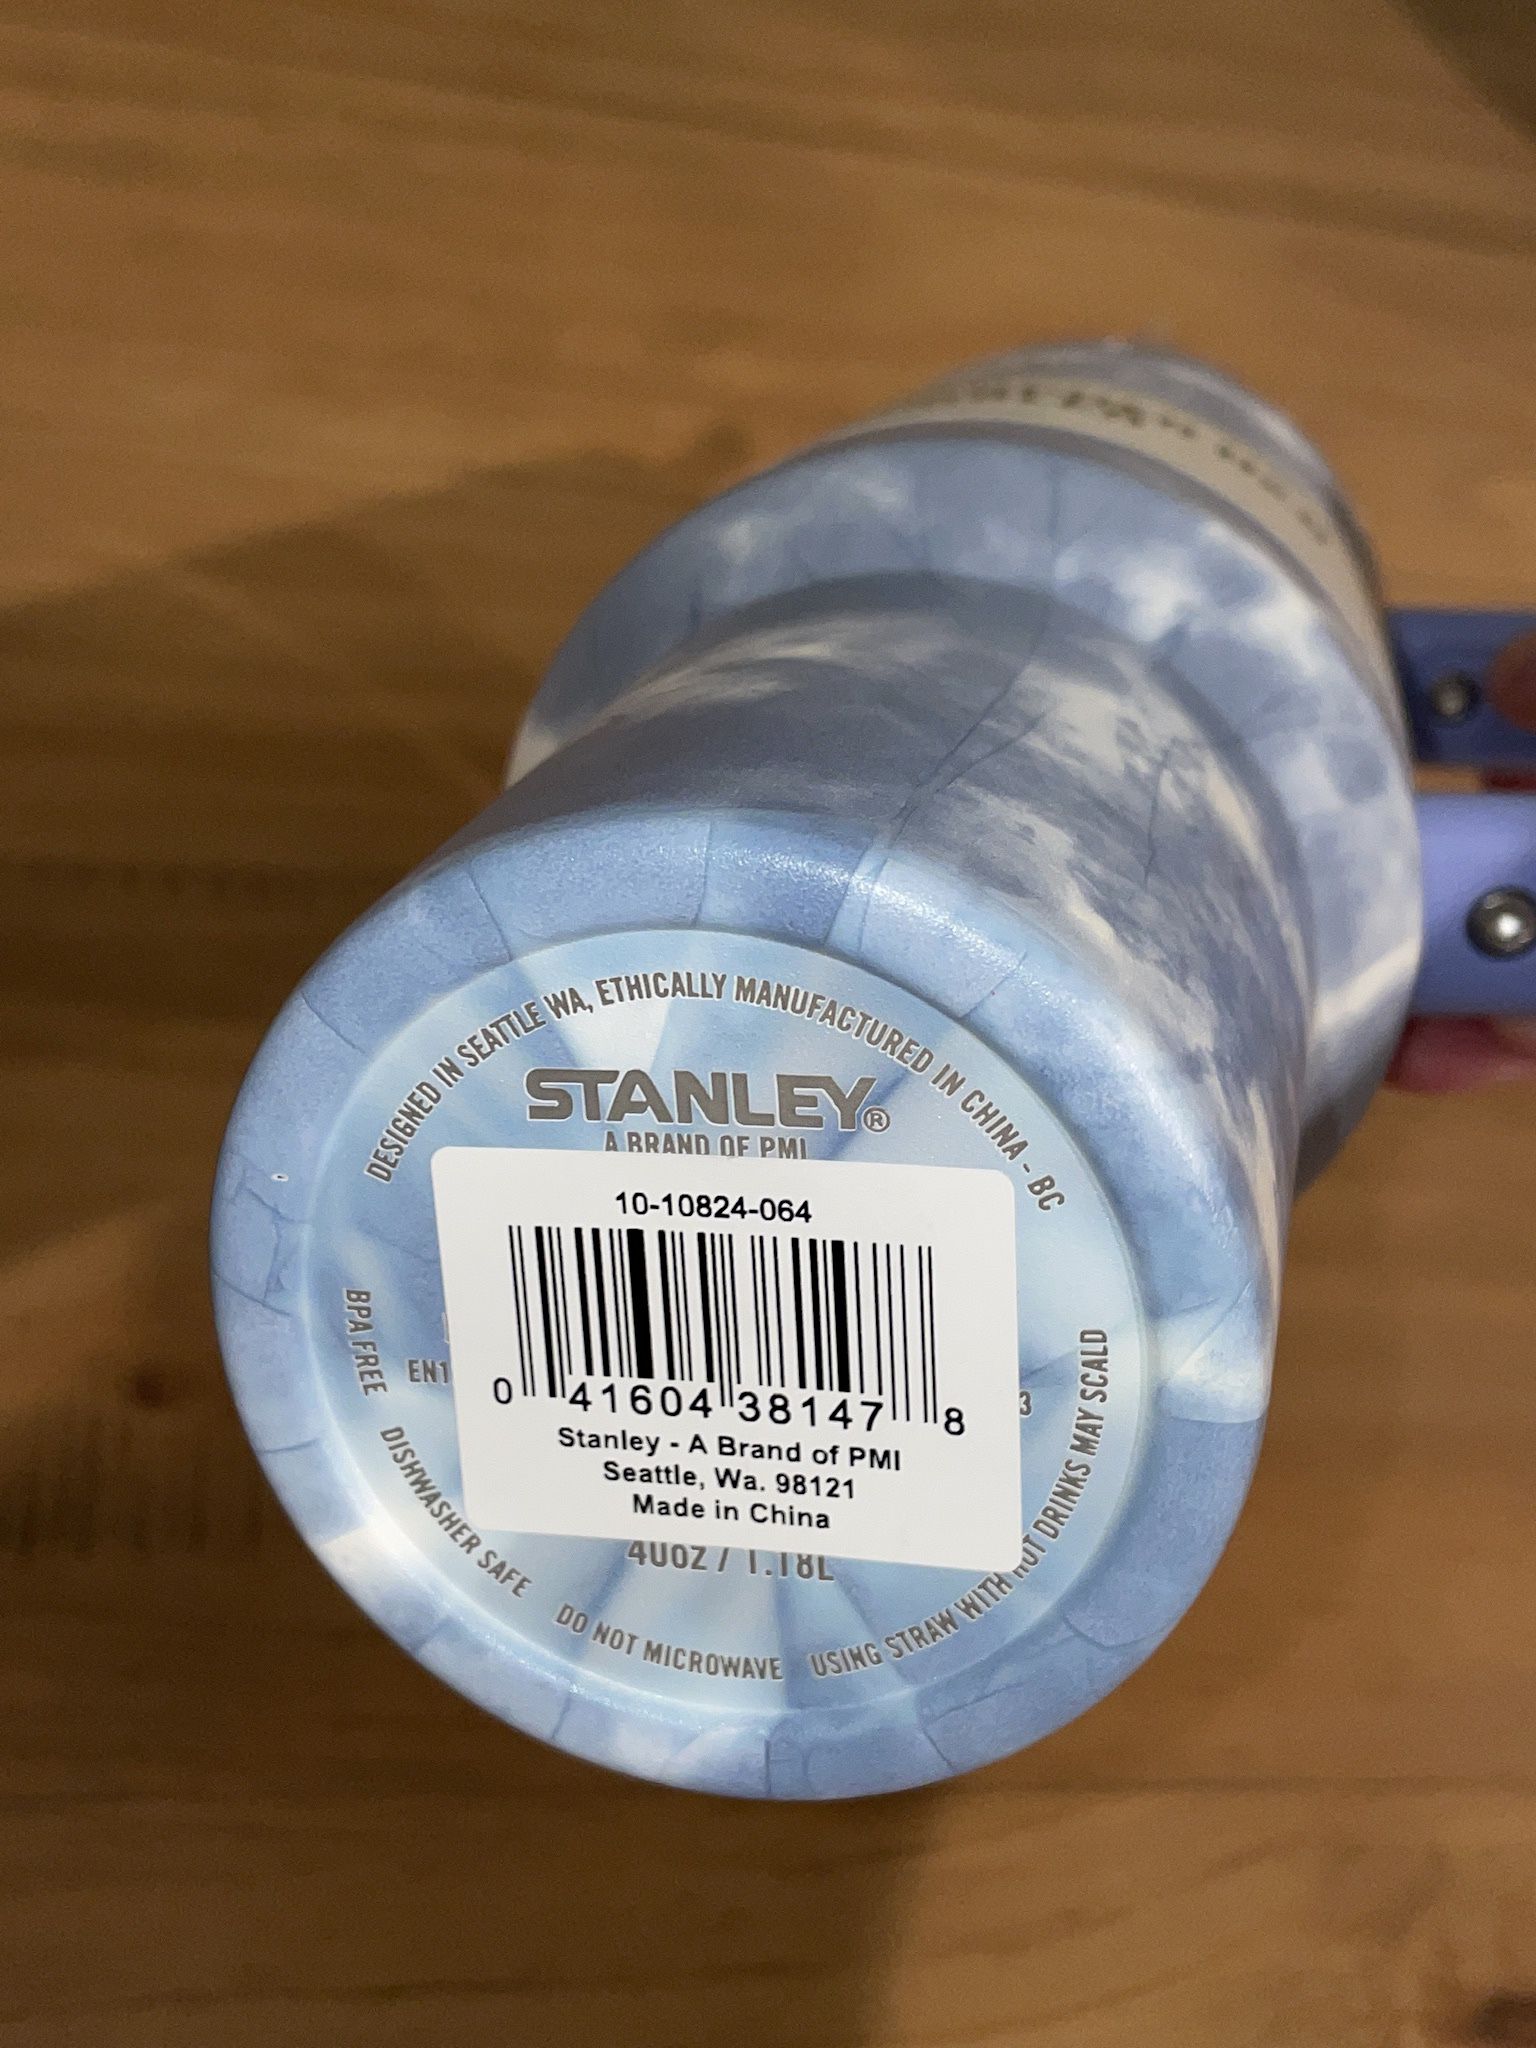 Stanley 40 Oz Citron And Citron Tie Dye New for Sale in Magnolia, TX -  OfferUp